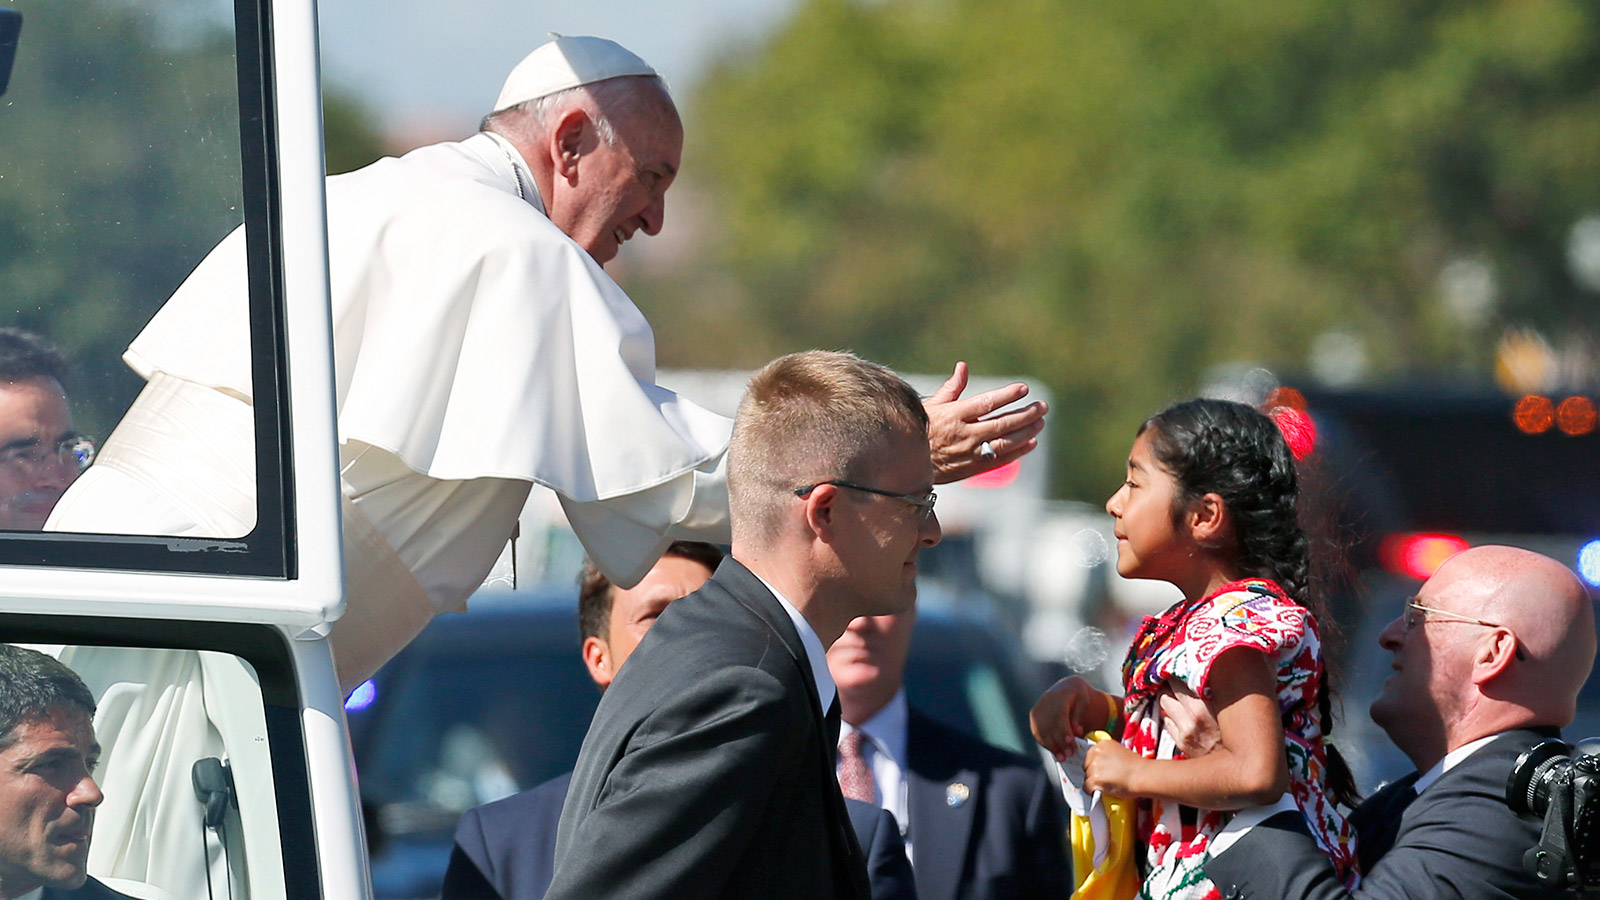 Pope Francis reaches for Sophia Cruz during a papal parade in Washington.